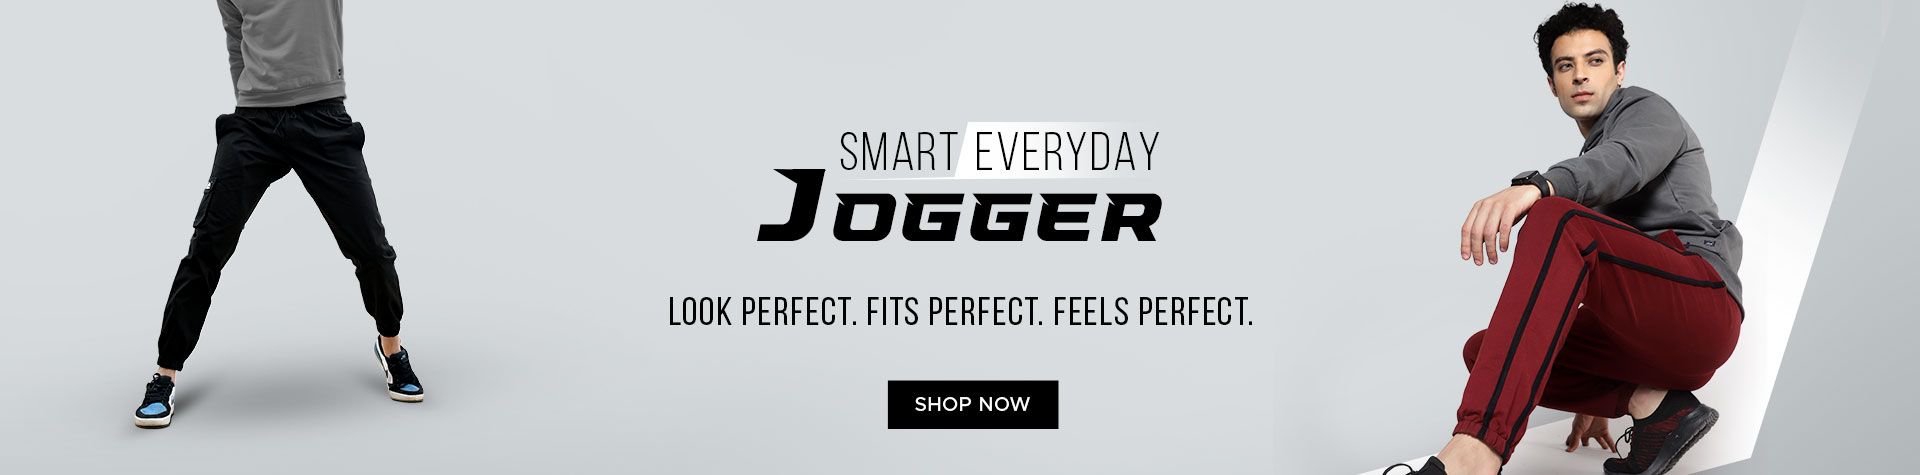 All Purpose Joggers For Men